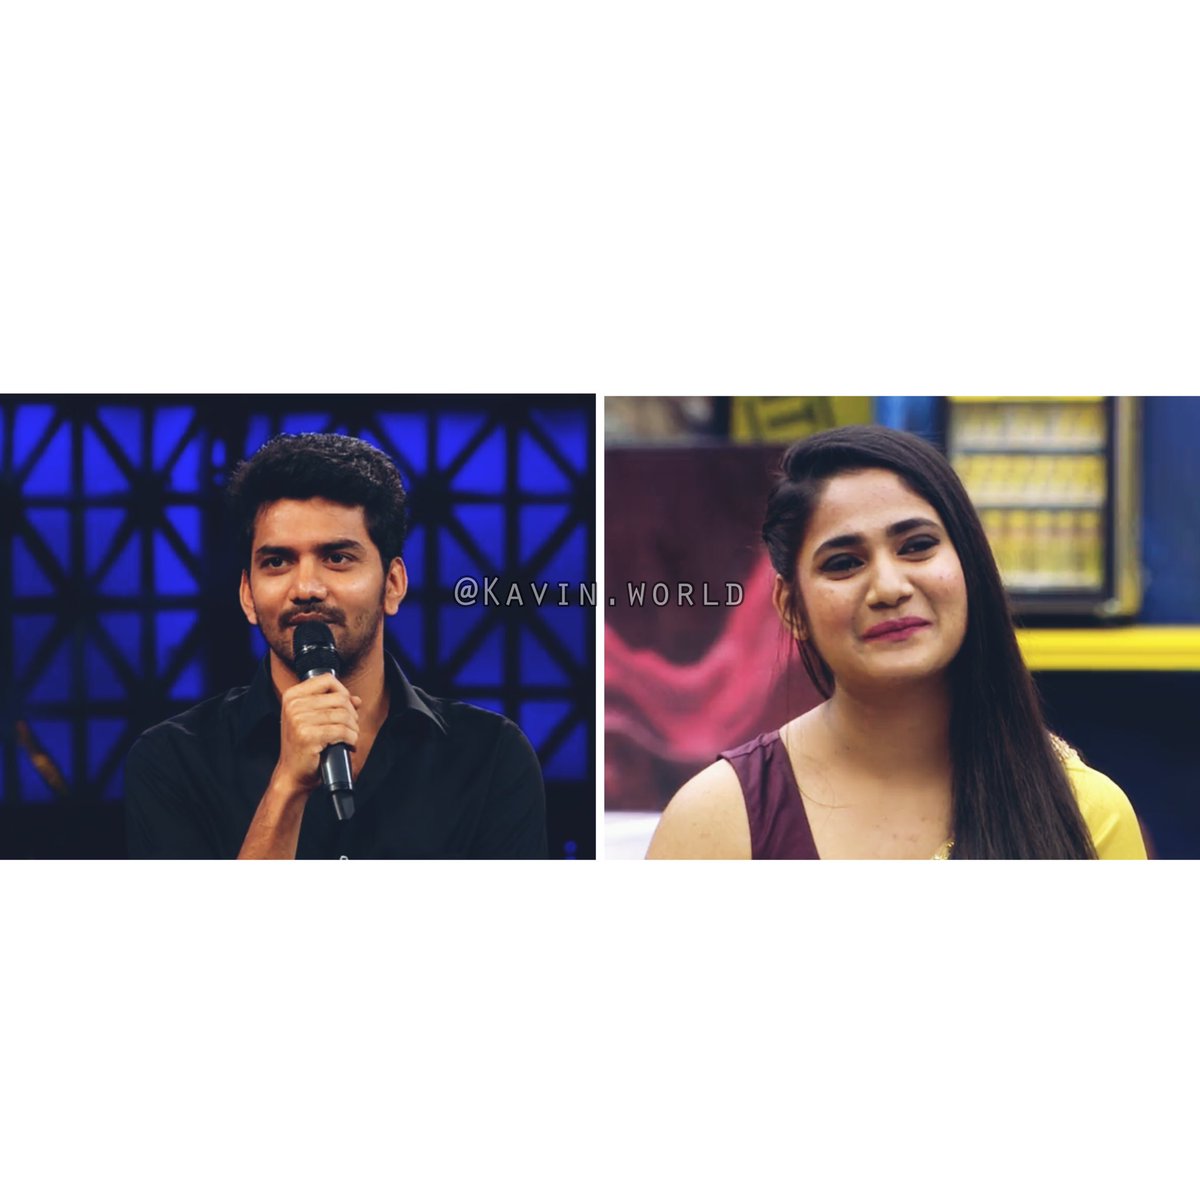 The Reunions Of KaviLiya (10) After Kavin Exit .which he done for the Loved One Liya .They are Chitchatting Like Kids ..We Saw Liya Smiling Now .A Pure Smiling which She lost 3 days Ago . He missed her ,She Missed Him We missed KaviLiya Bathrama Iru , Iam waiting 